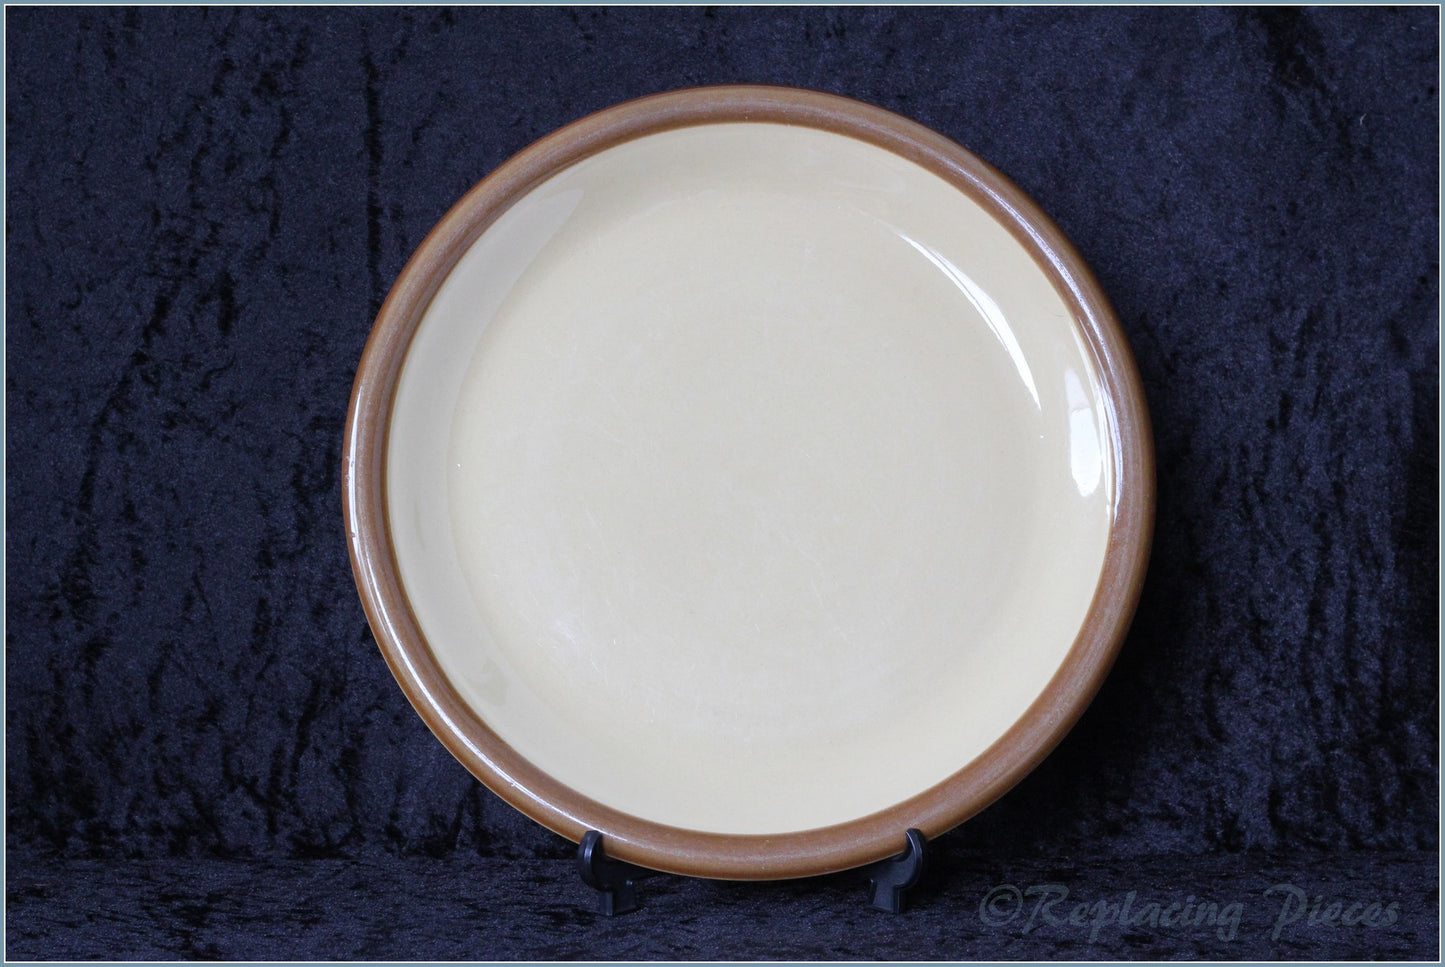 T G Green - Granville - 9 1/2" Luncheon Plate